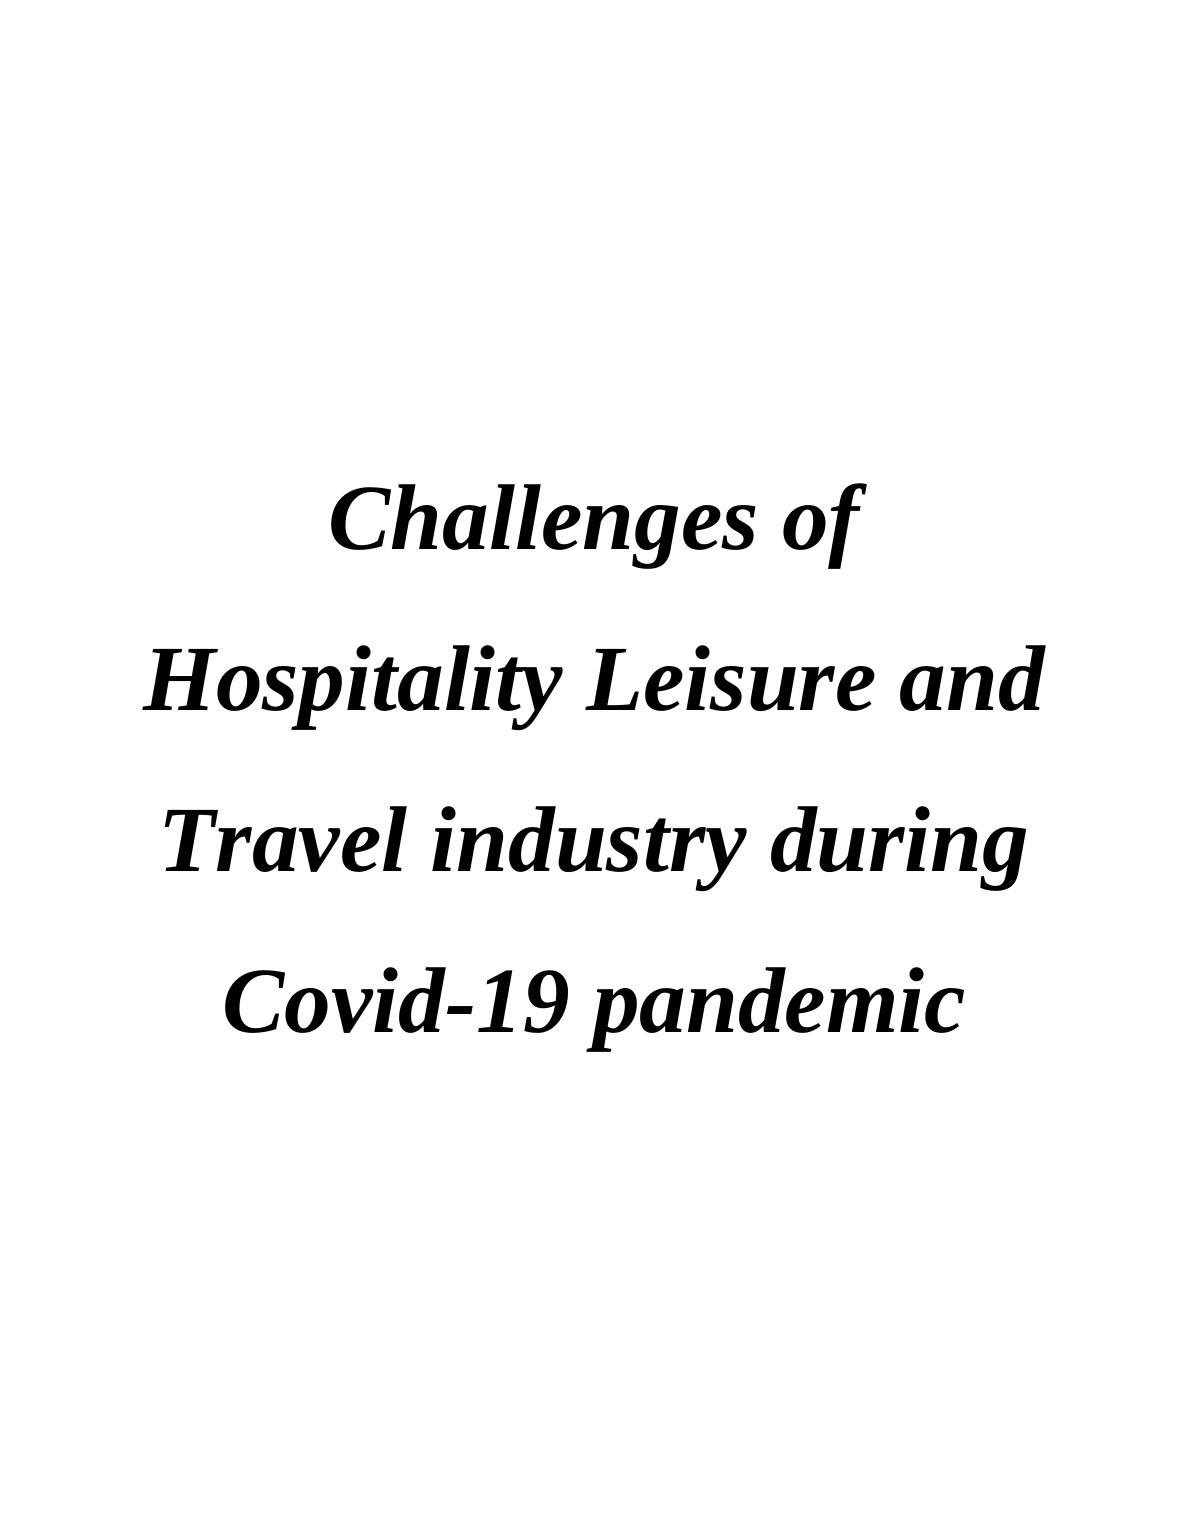 Challenges of Hospitality Leisure and Travel industry during Covid-19 pandemic_1